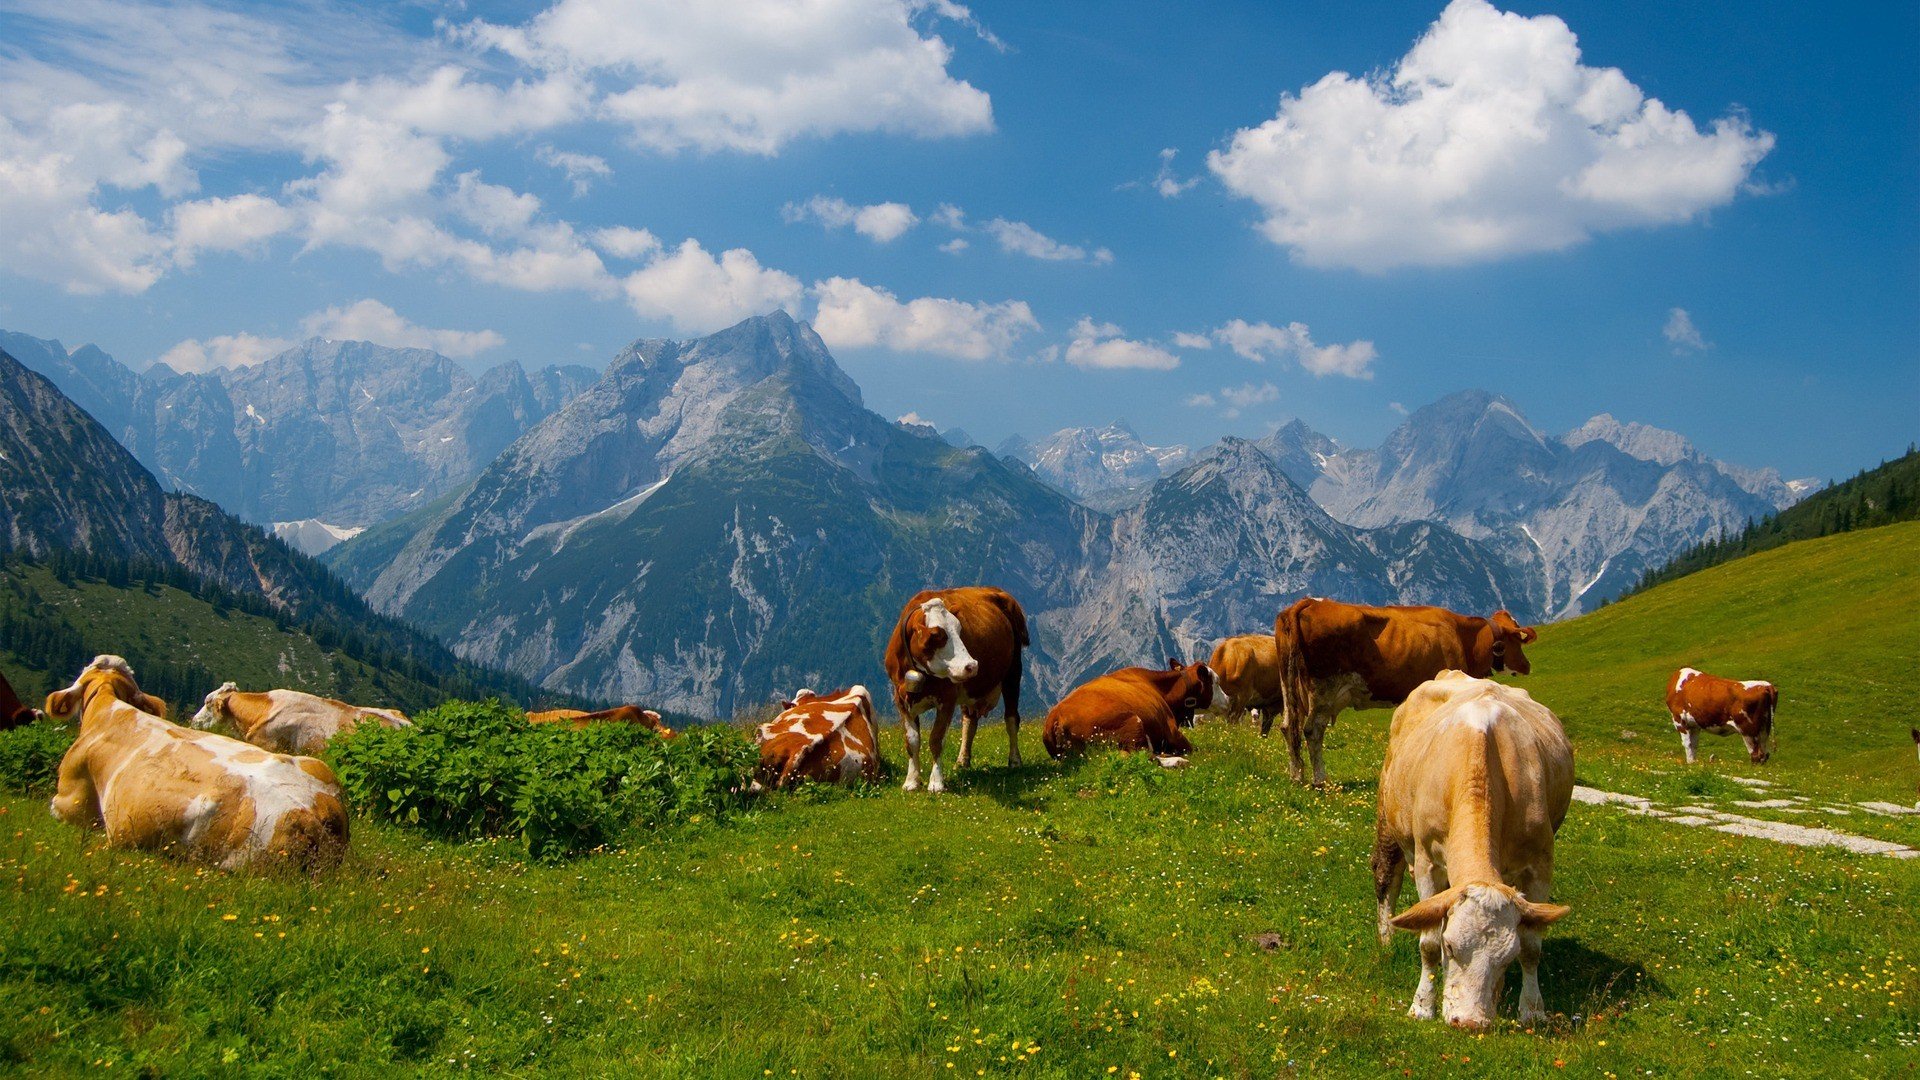 mountains, Landscapes, Nature, Animals, Cows Wallpaper